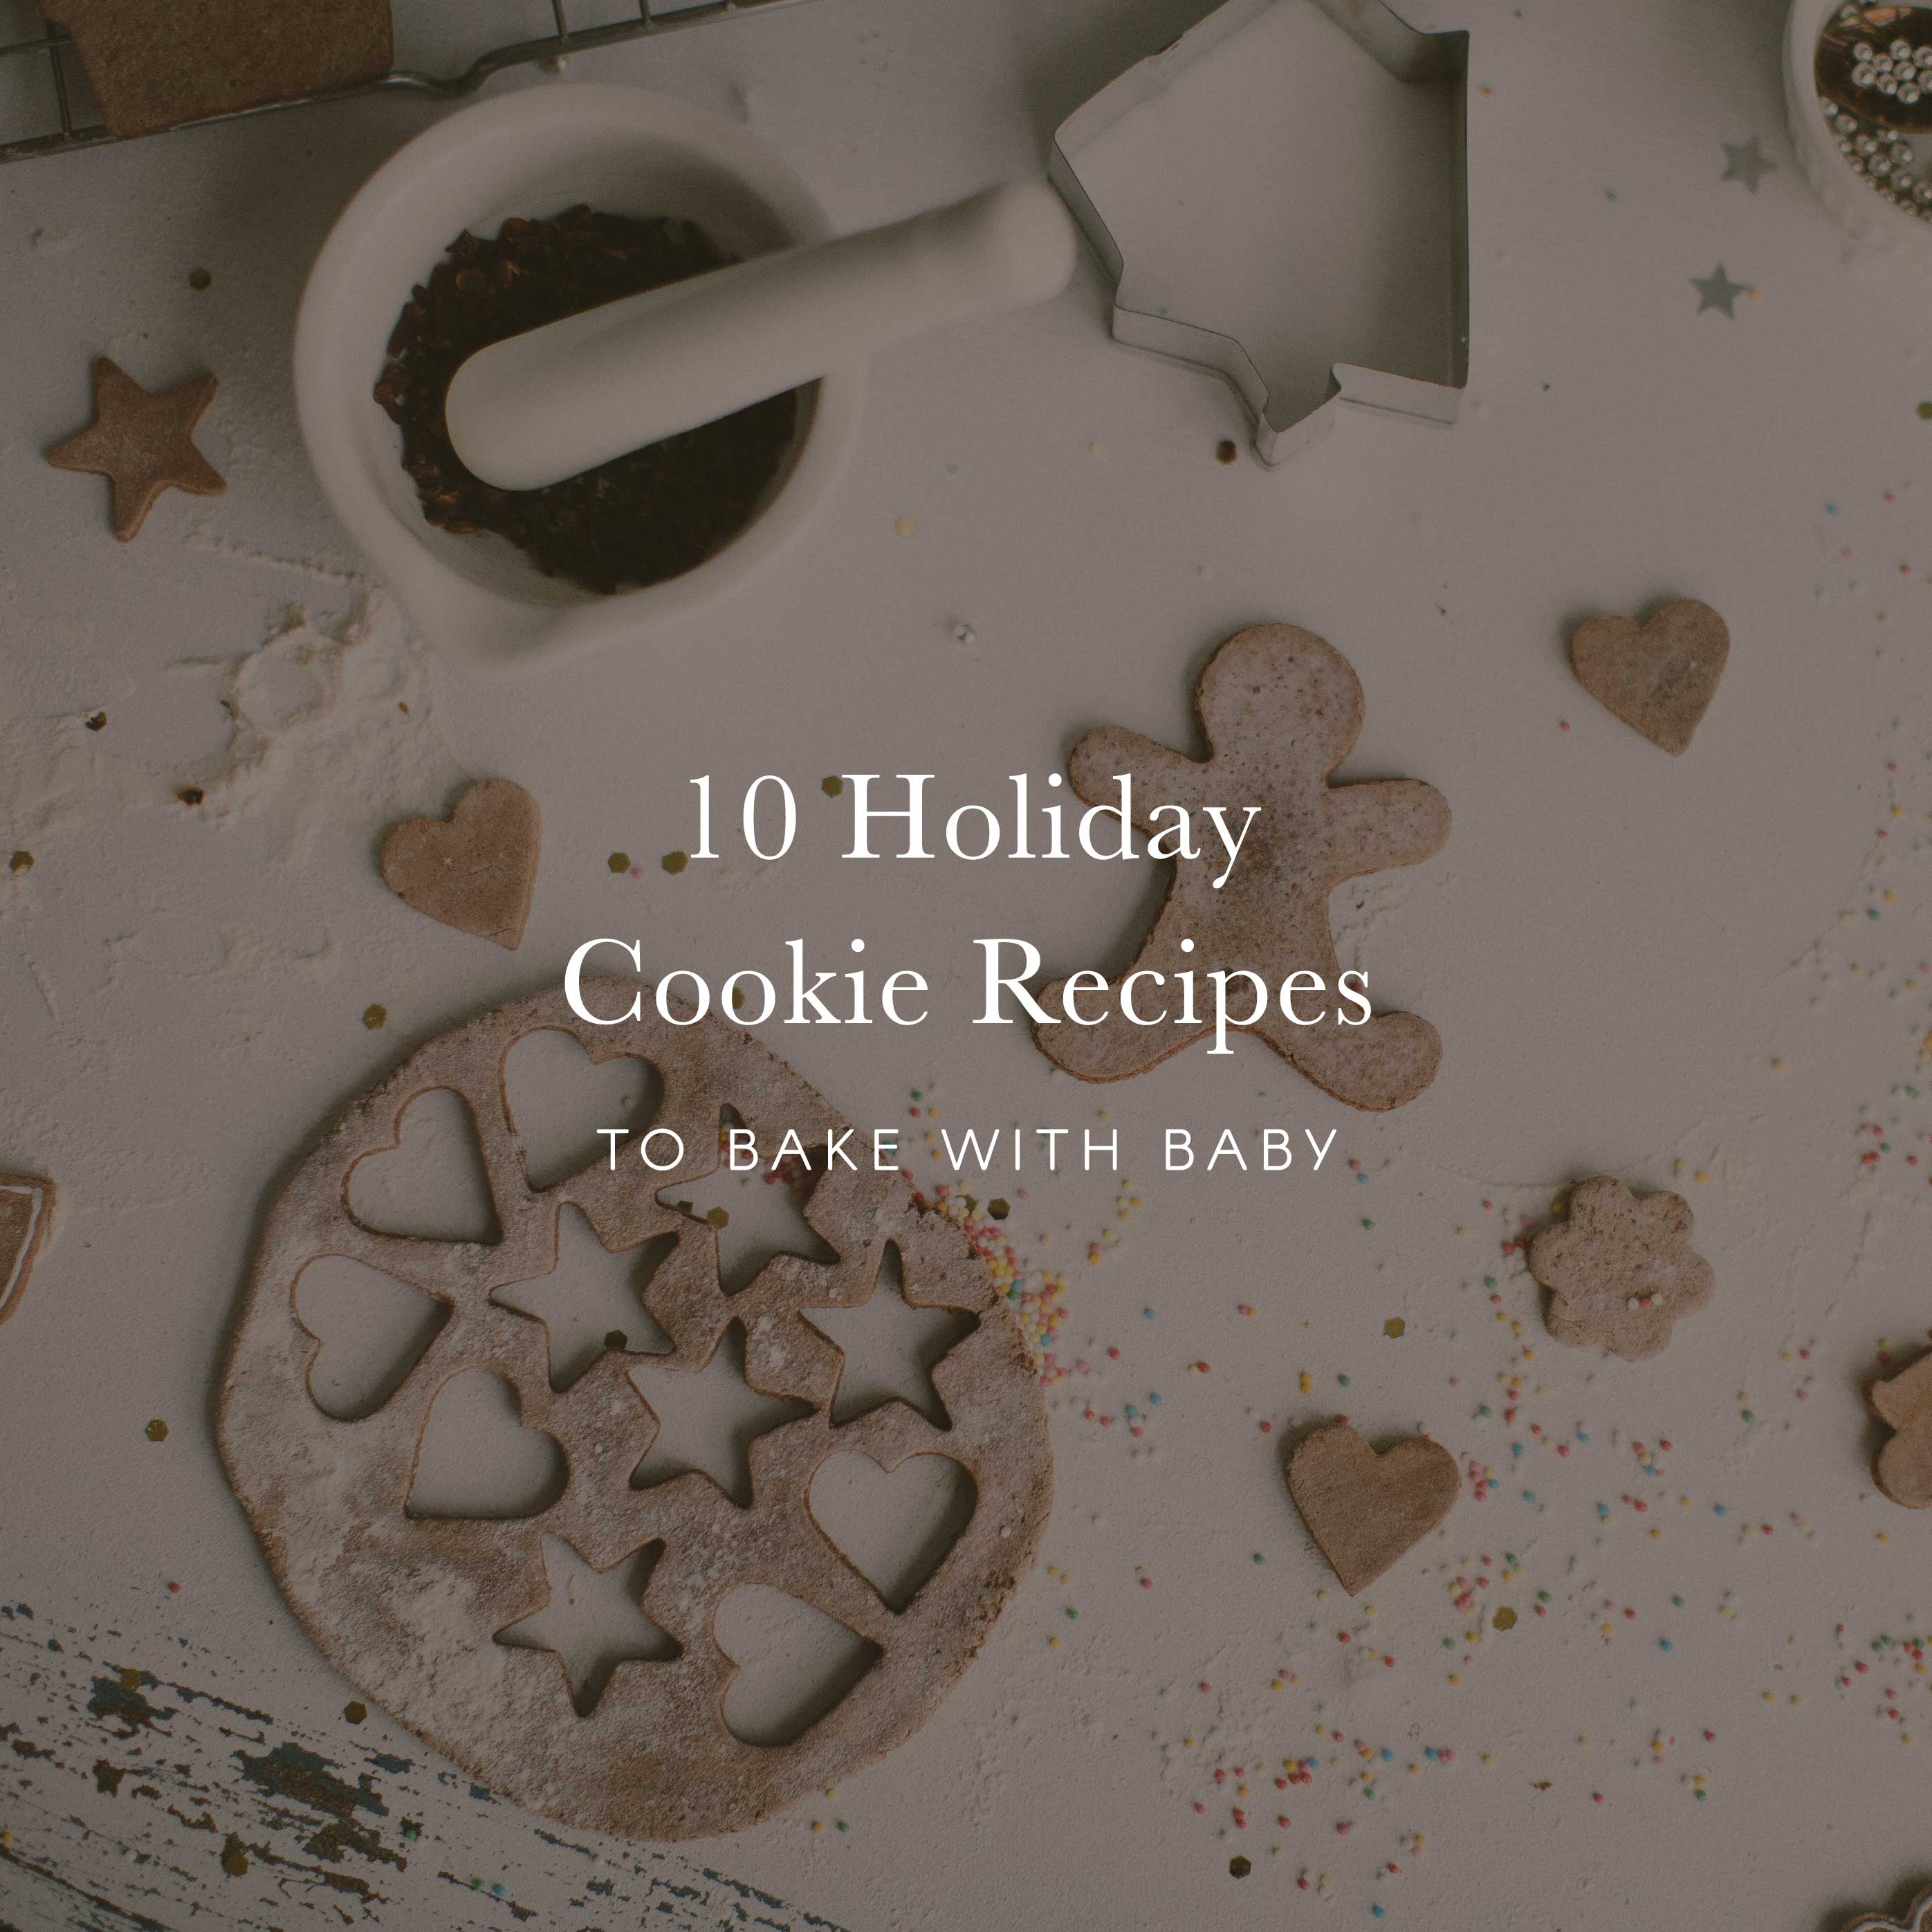 10 Holiday Cookie Recipes to Bake with Baby